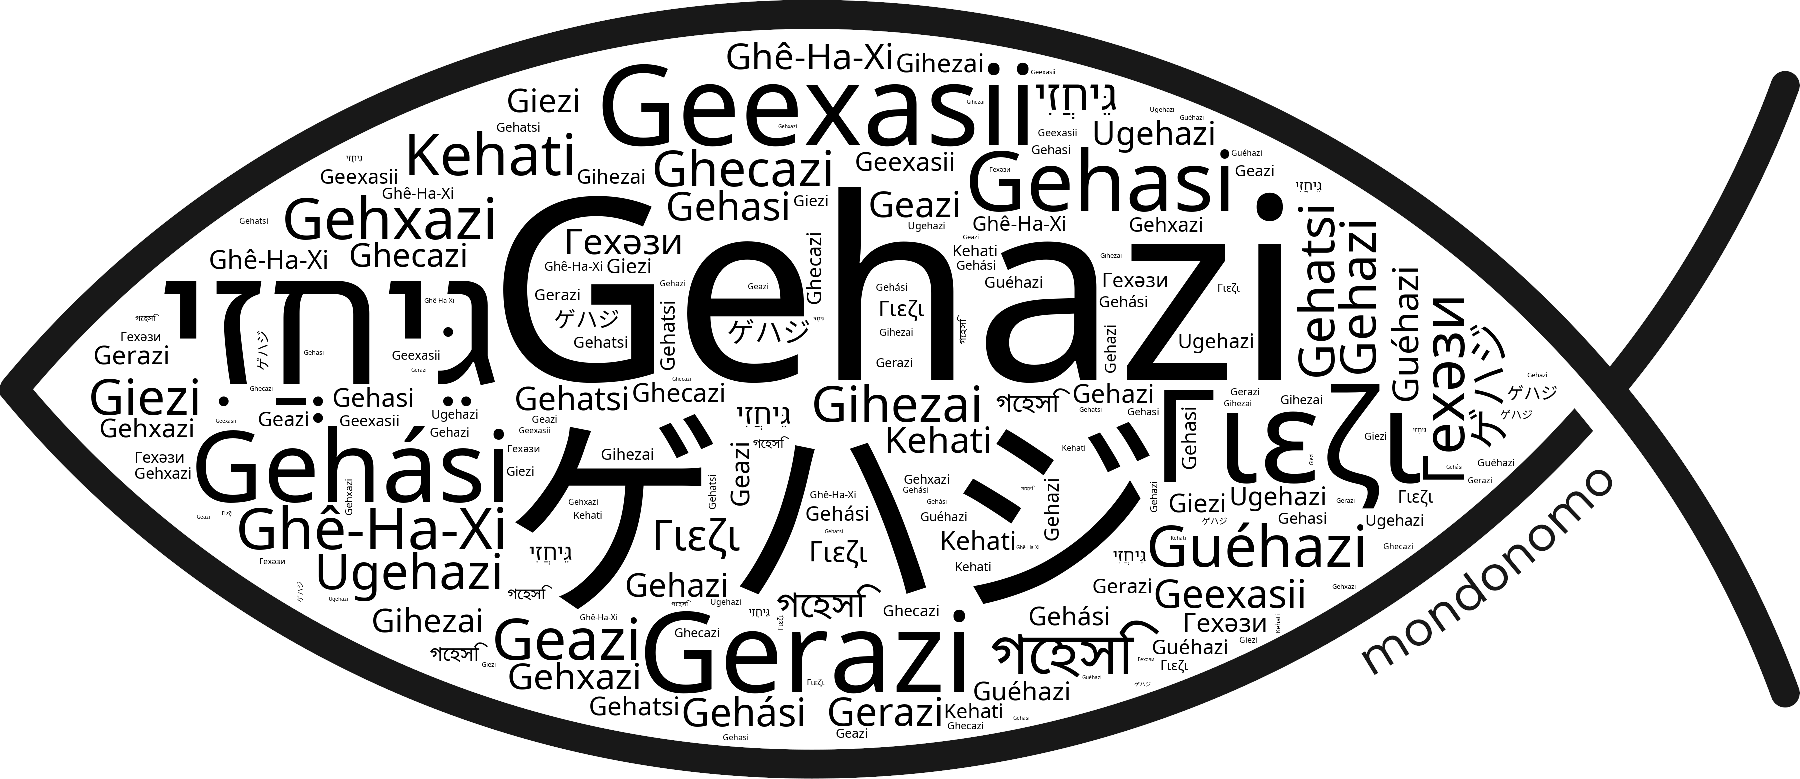 Name Gehazi in the world's Bibles